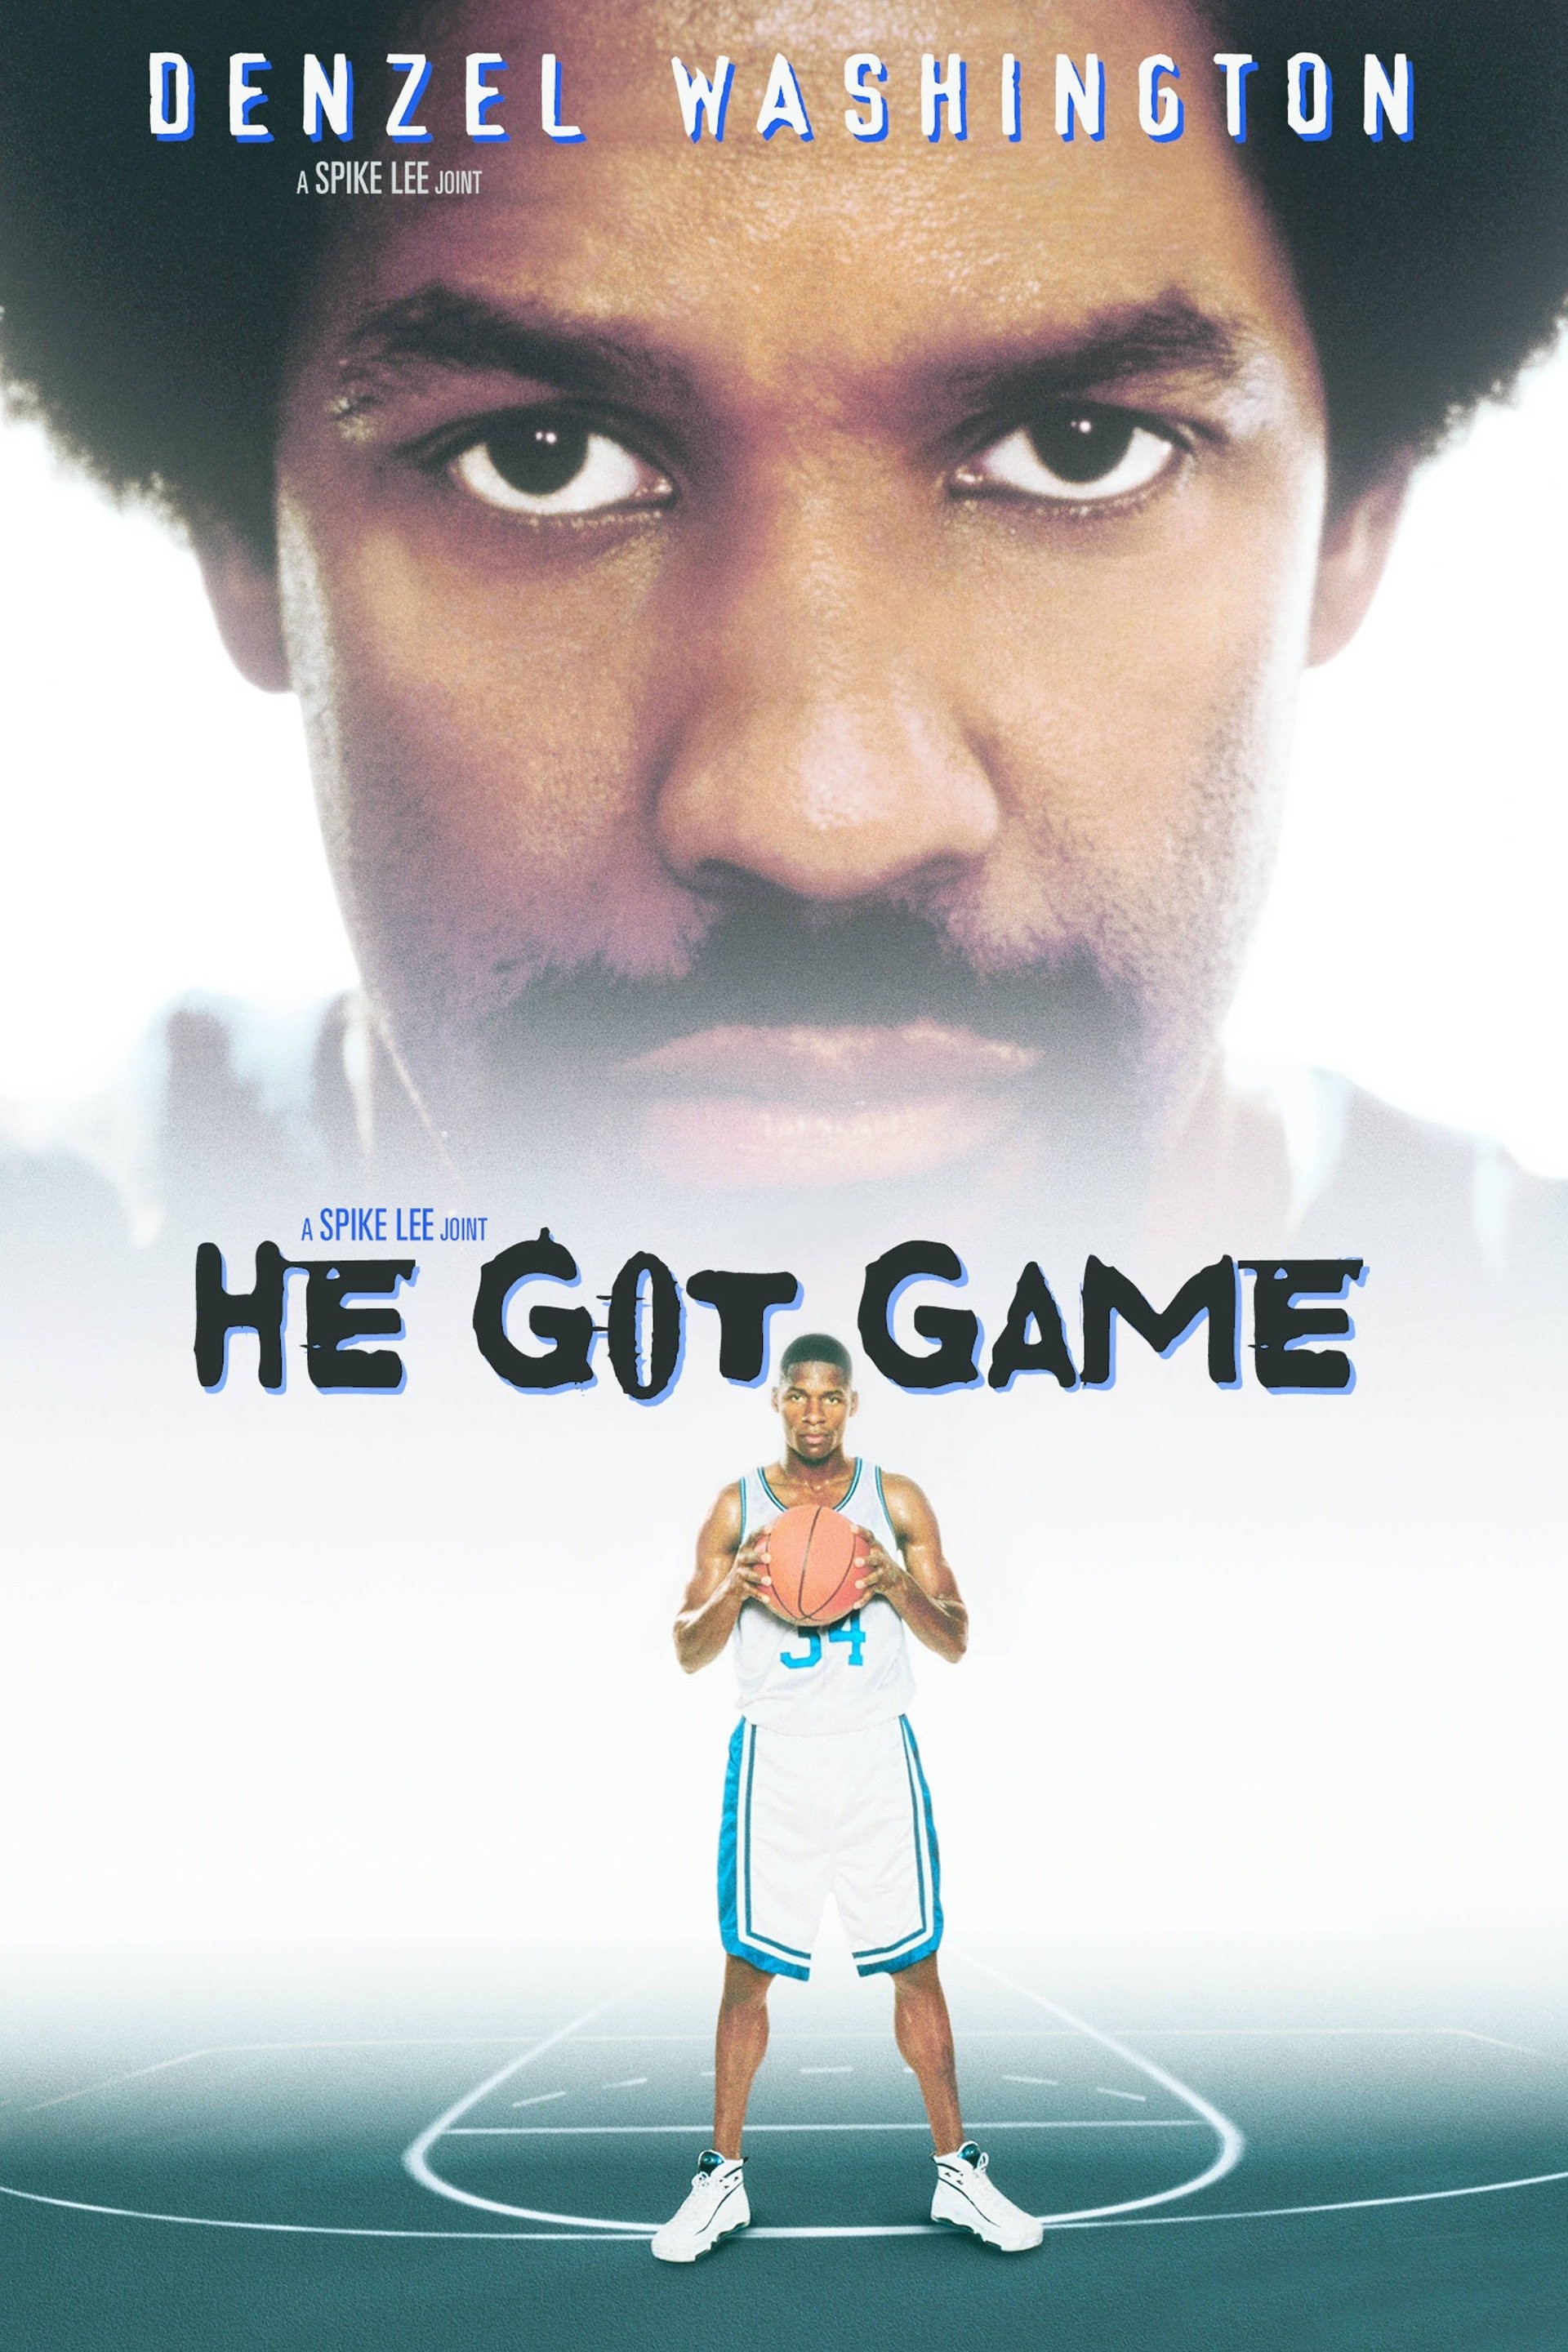 Ray Allen shares how he got the role for the movie 'He Got Game